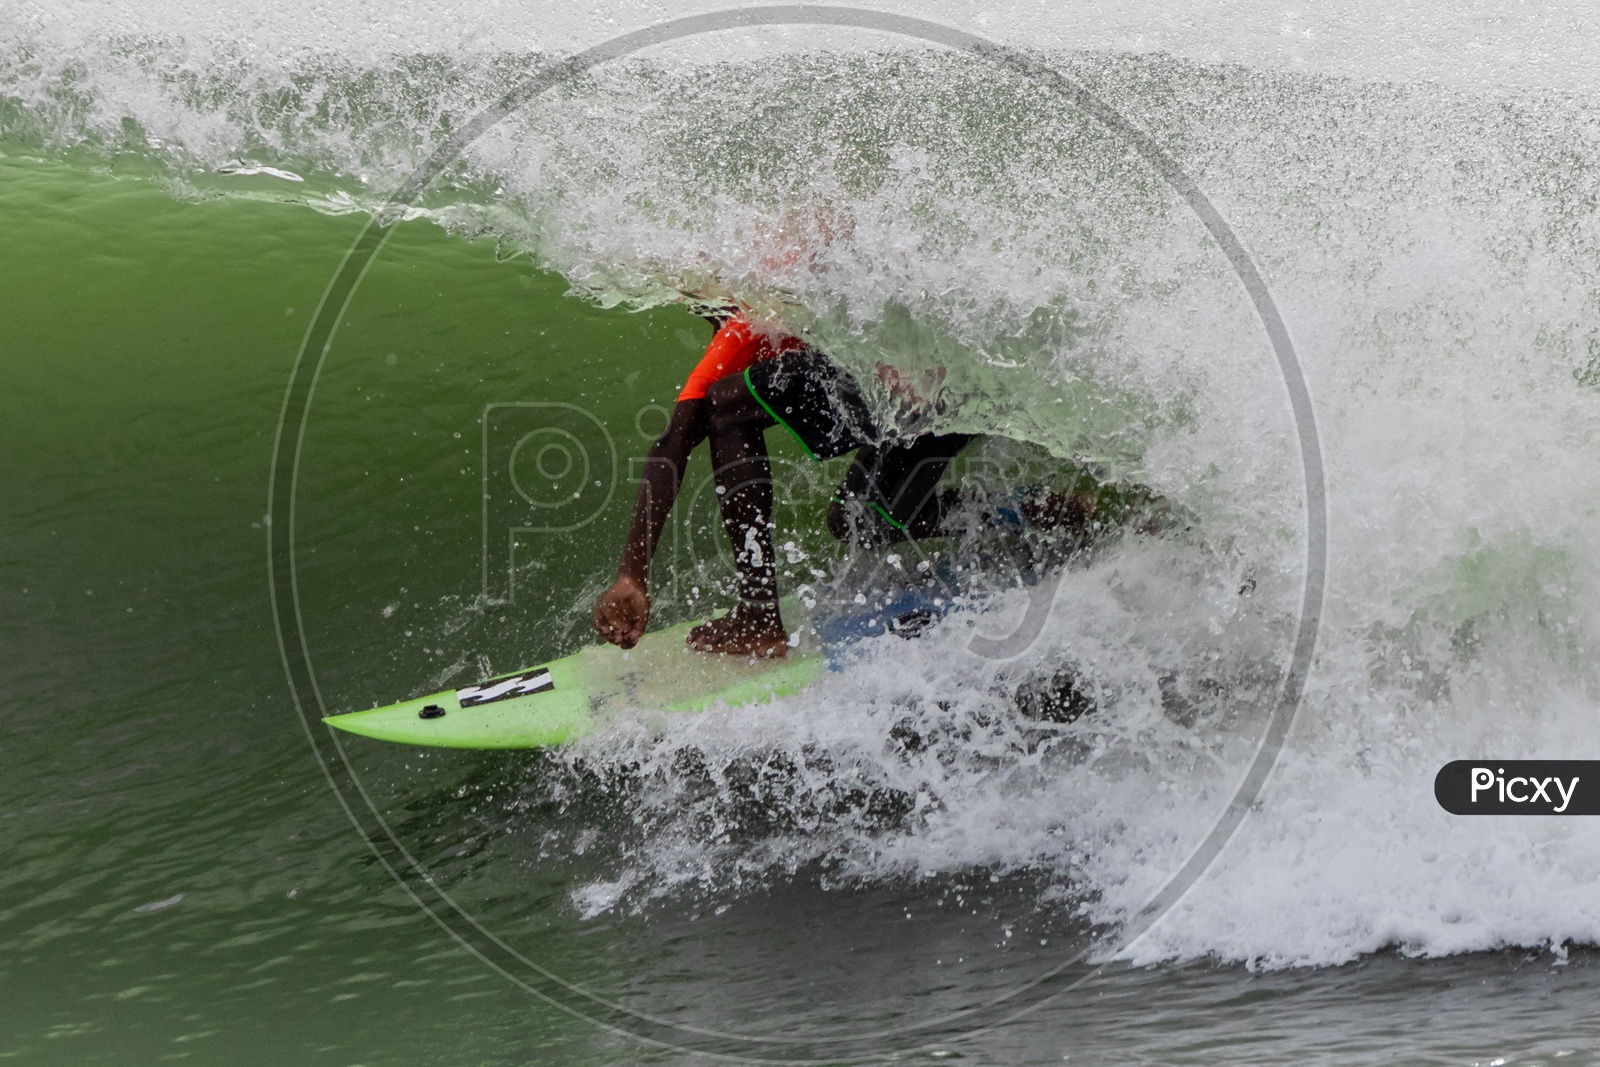  surfer Under the Canopy